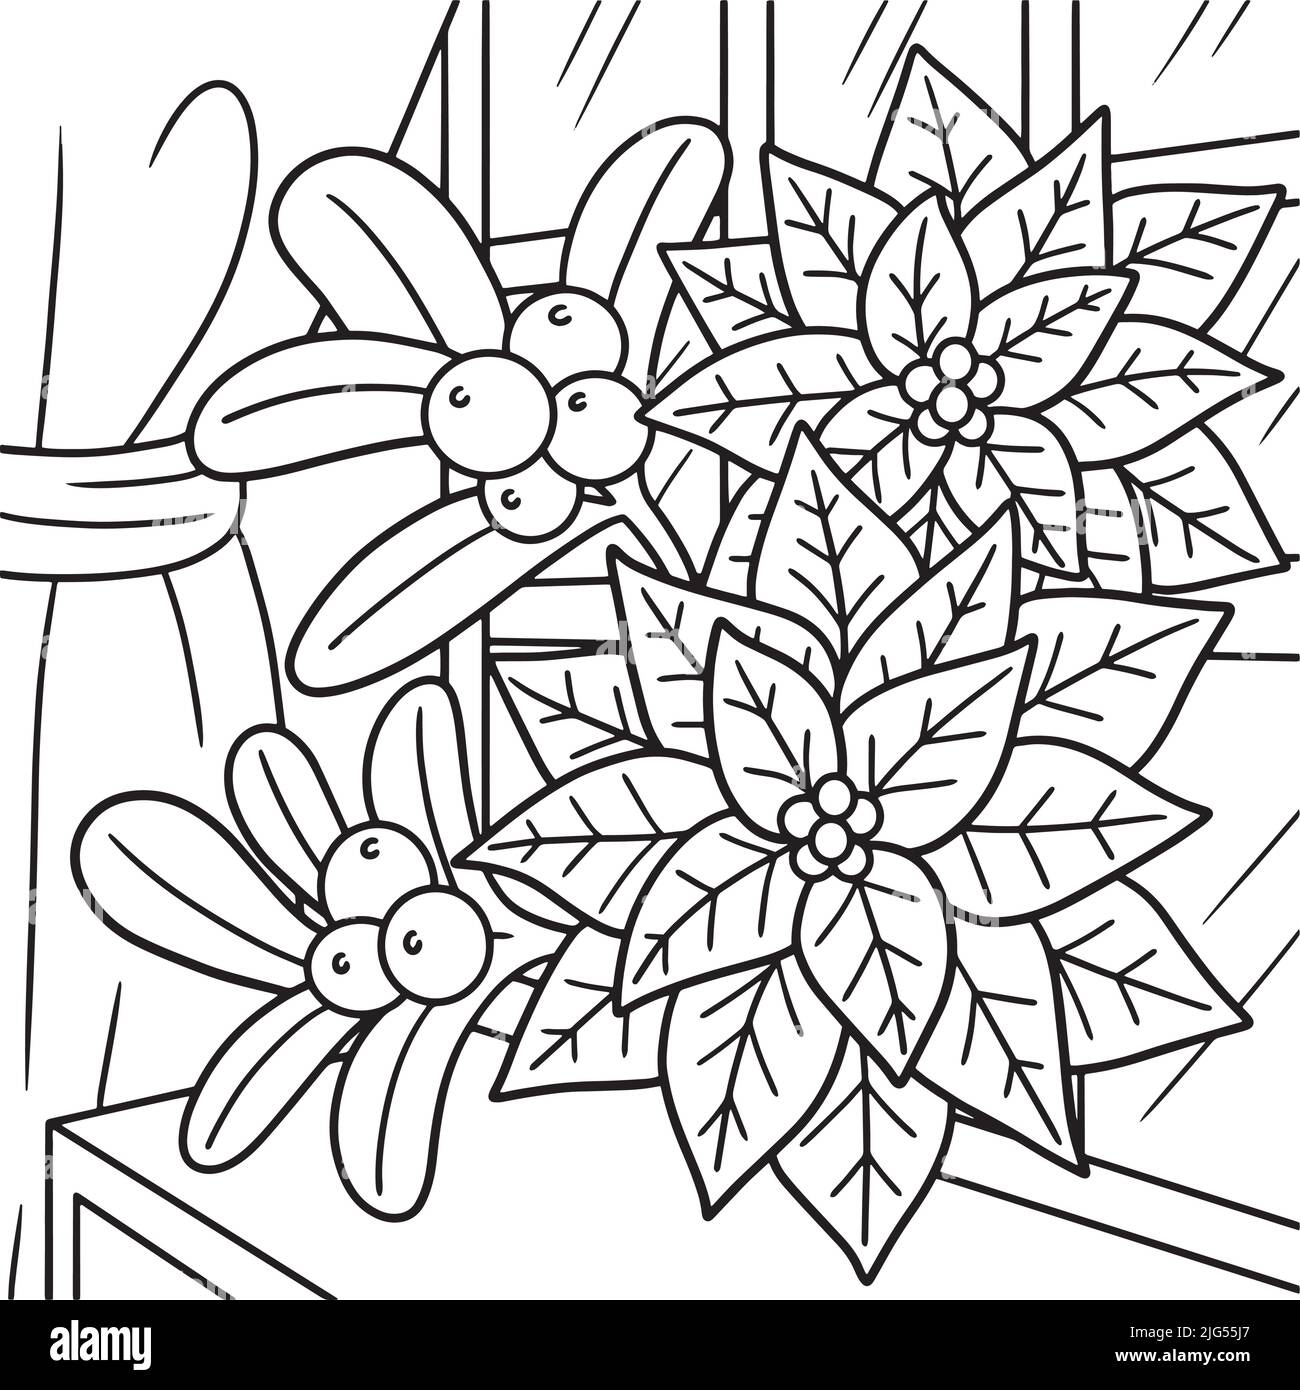 Christmas Poinsettia Coloring Page for Kids Stock Vector